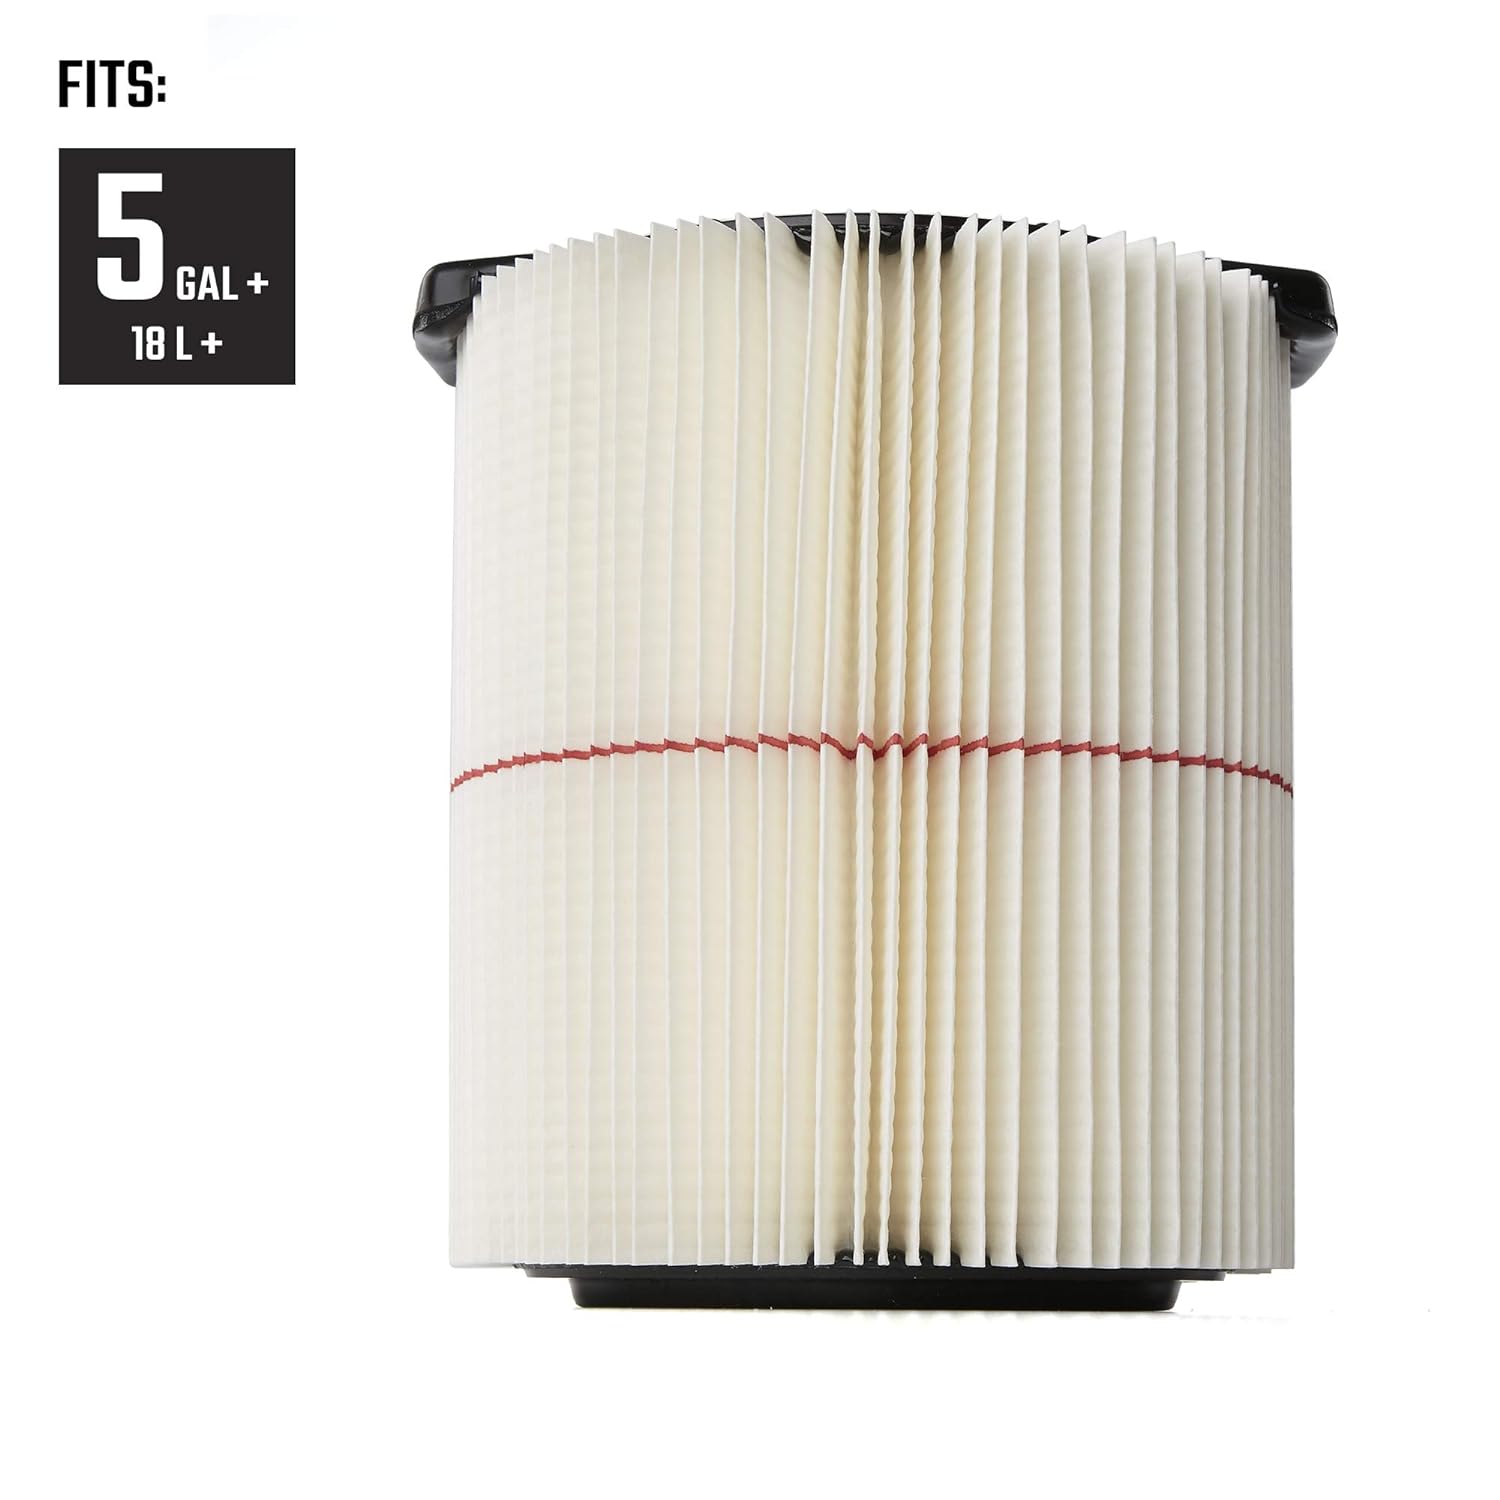 TKM Products Cmxzvbe38755 Red Stripe General Purpose Wet/Dry Vac Replacement Filter For 5 To 20 Gallon Shop Vacuums, 2-Pack